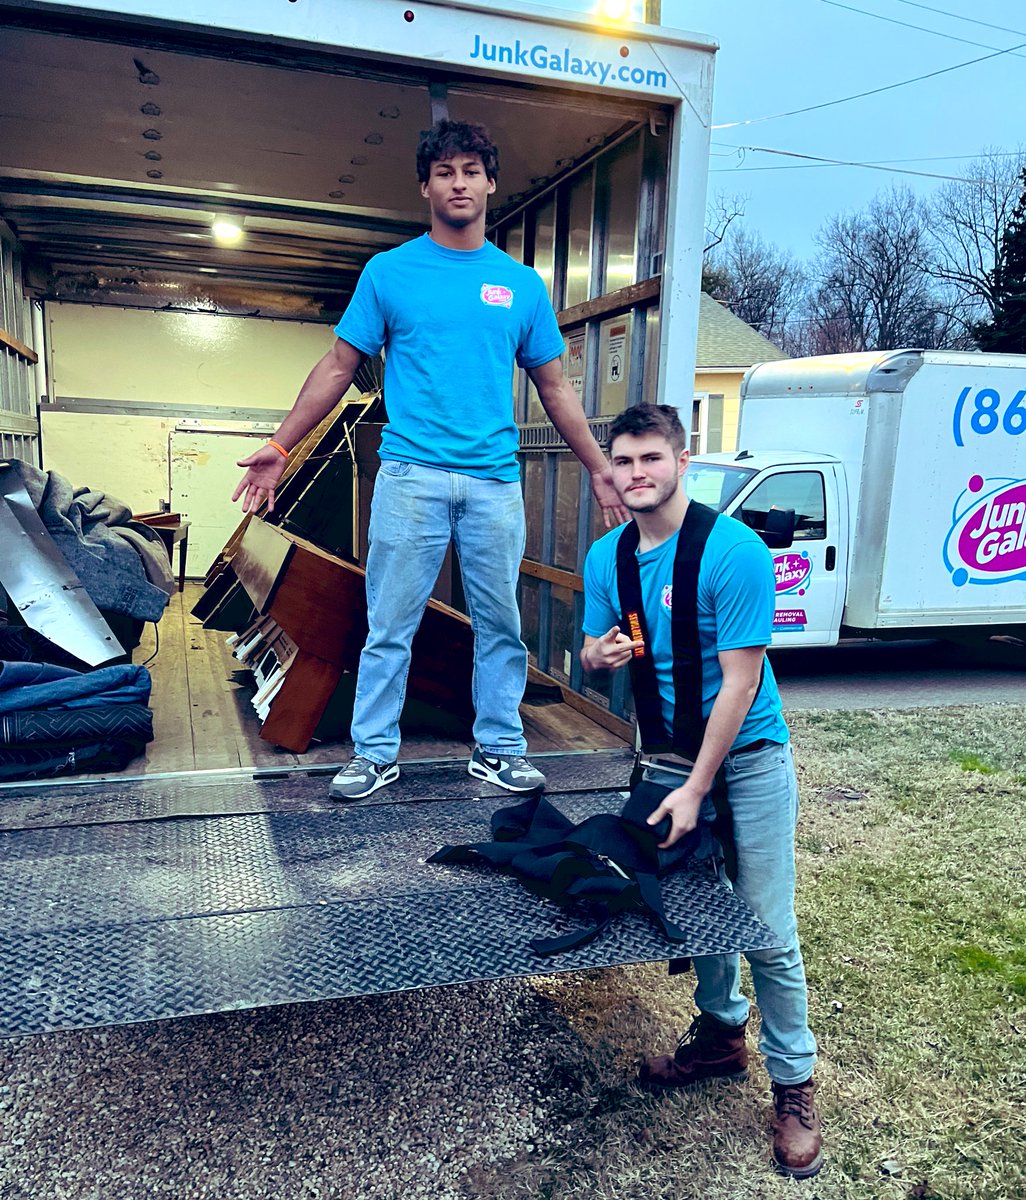 Piano removal. Shed demo. #Housecleanout. Great day.

#wetakeyourjunk #customerservice
#junkgalaxy #junk #junkremoval #homecleanout #propertycleanout #garagecleanout #estatecleanout #hoardercleanout #realestate #realtors #knoxrealty #knoxrealtors #knoxvilletn #knoxville